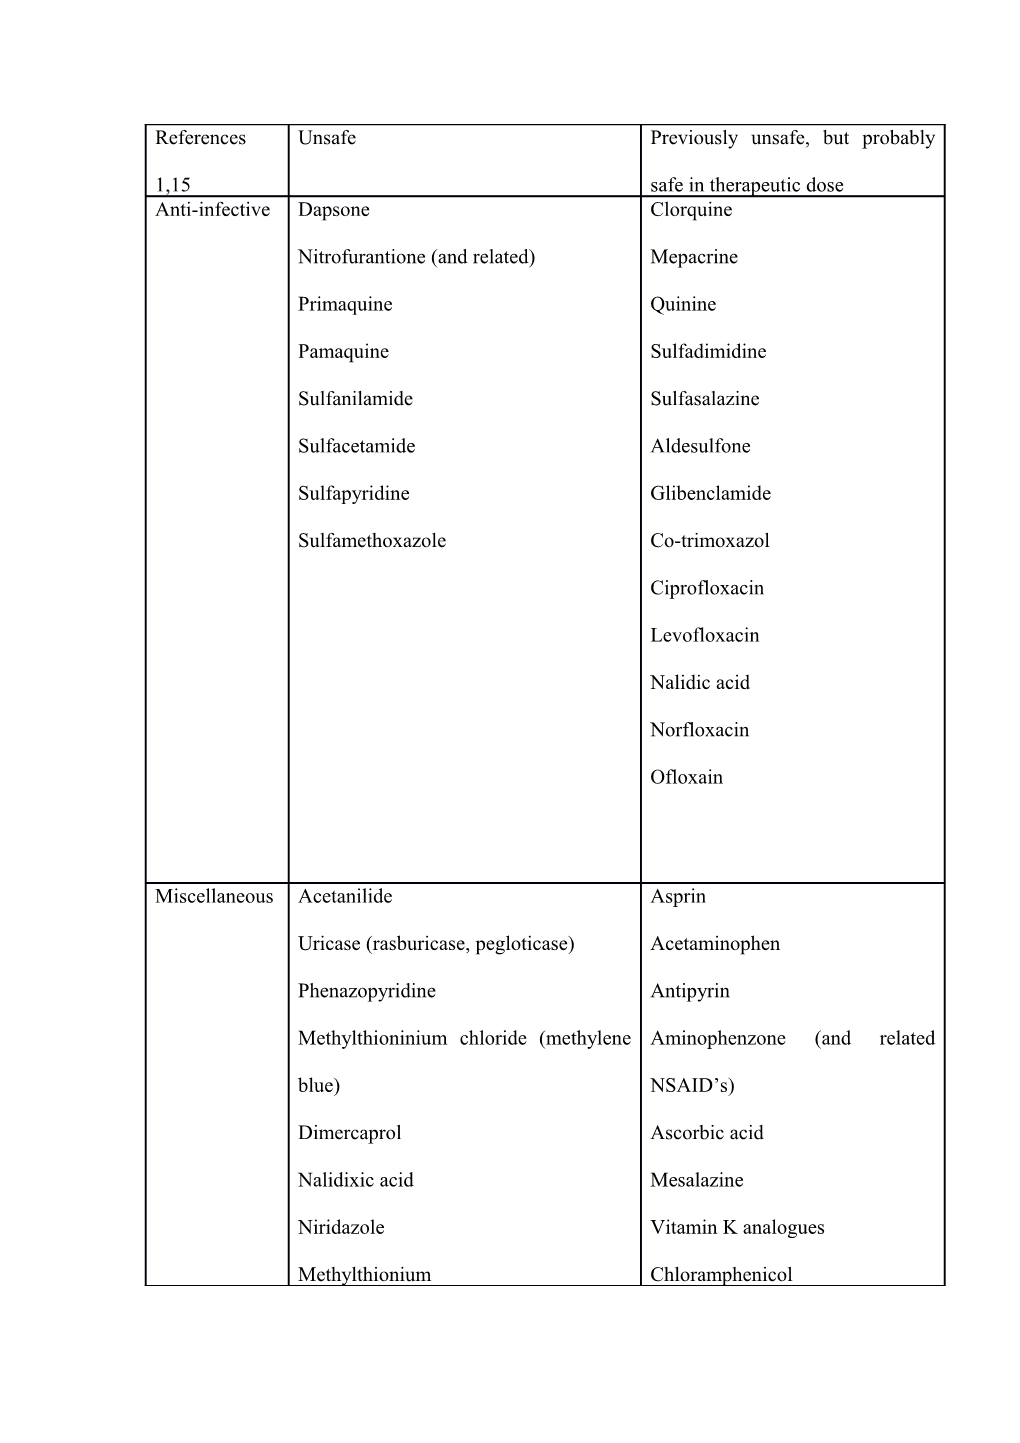 Electronic Supplementary Material Table 1: Drugs and Chemicals Associated with Substantial